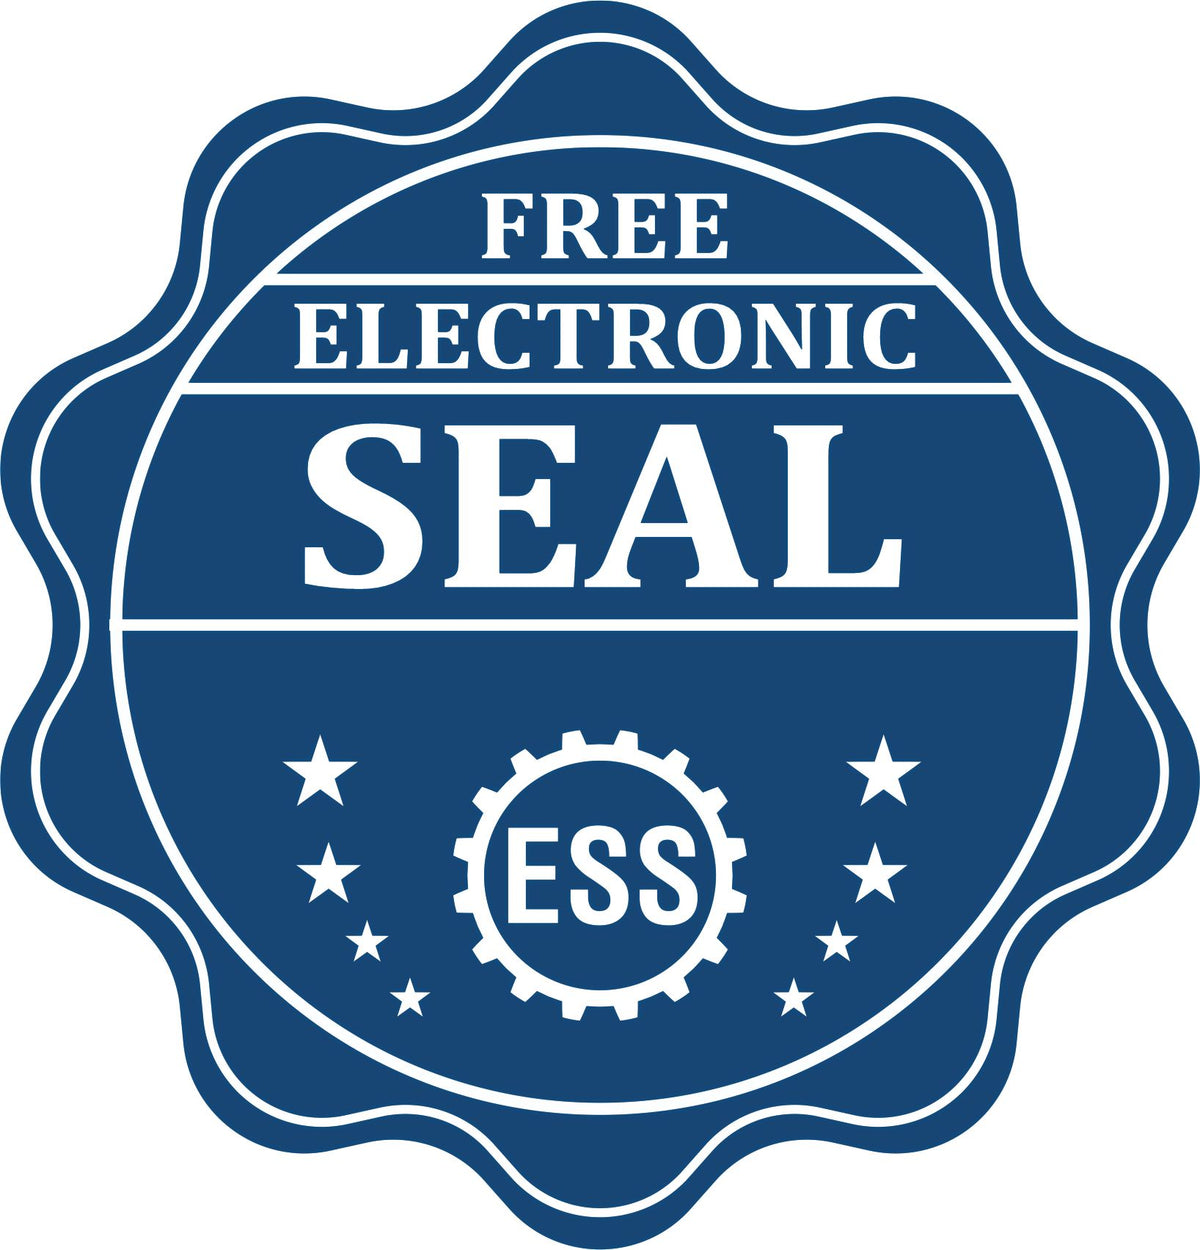 A badge showing a free electronic seal for the Slim Pre-Inked Iowa Land Surveyor Seal Stamp with stars and the ESS gear on the emblem.